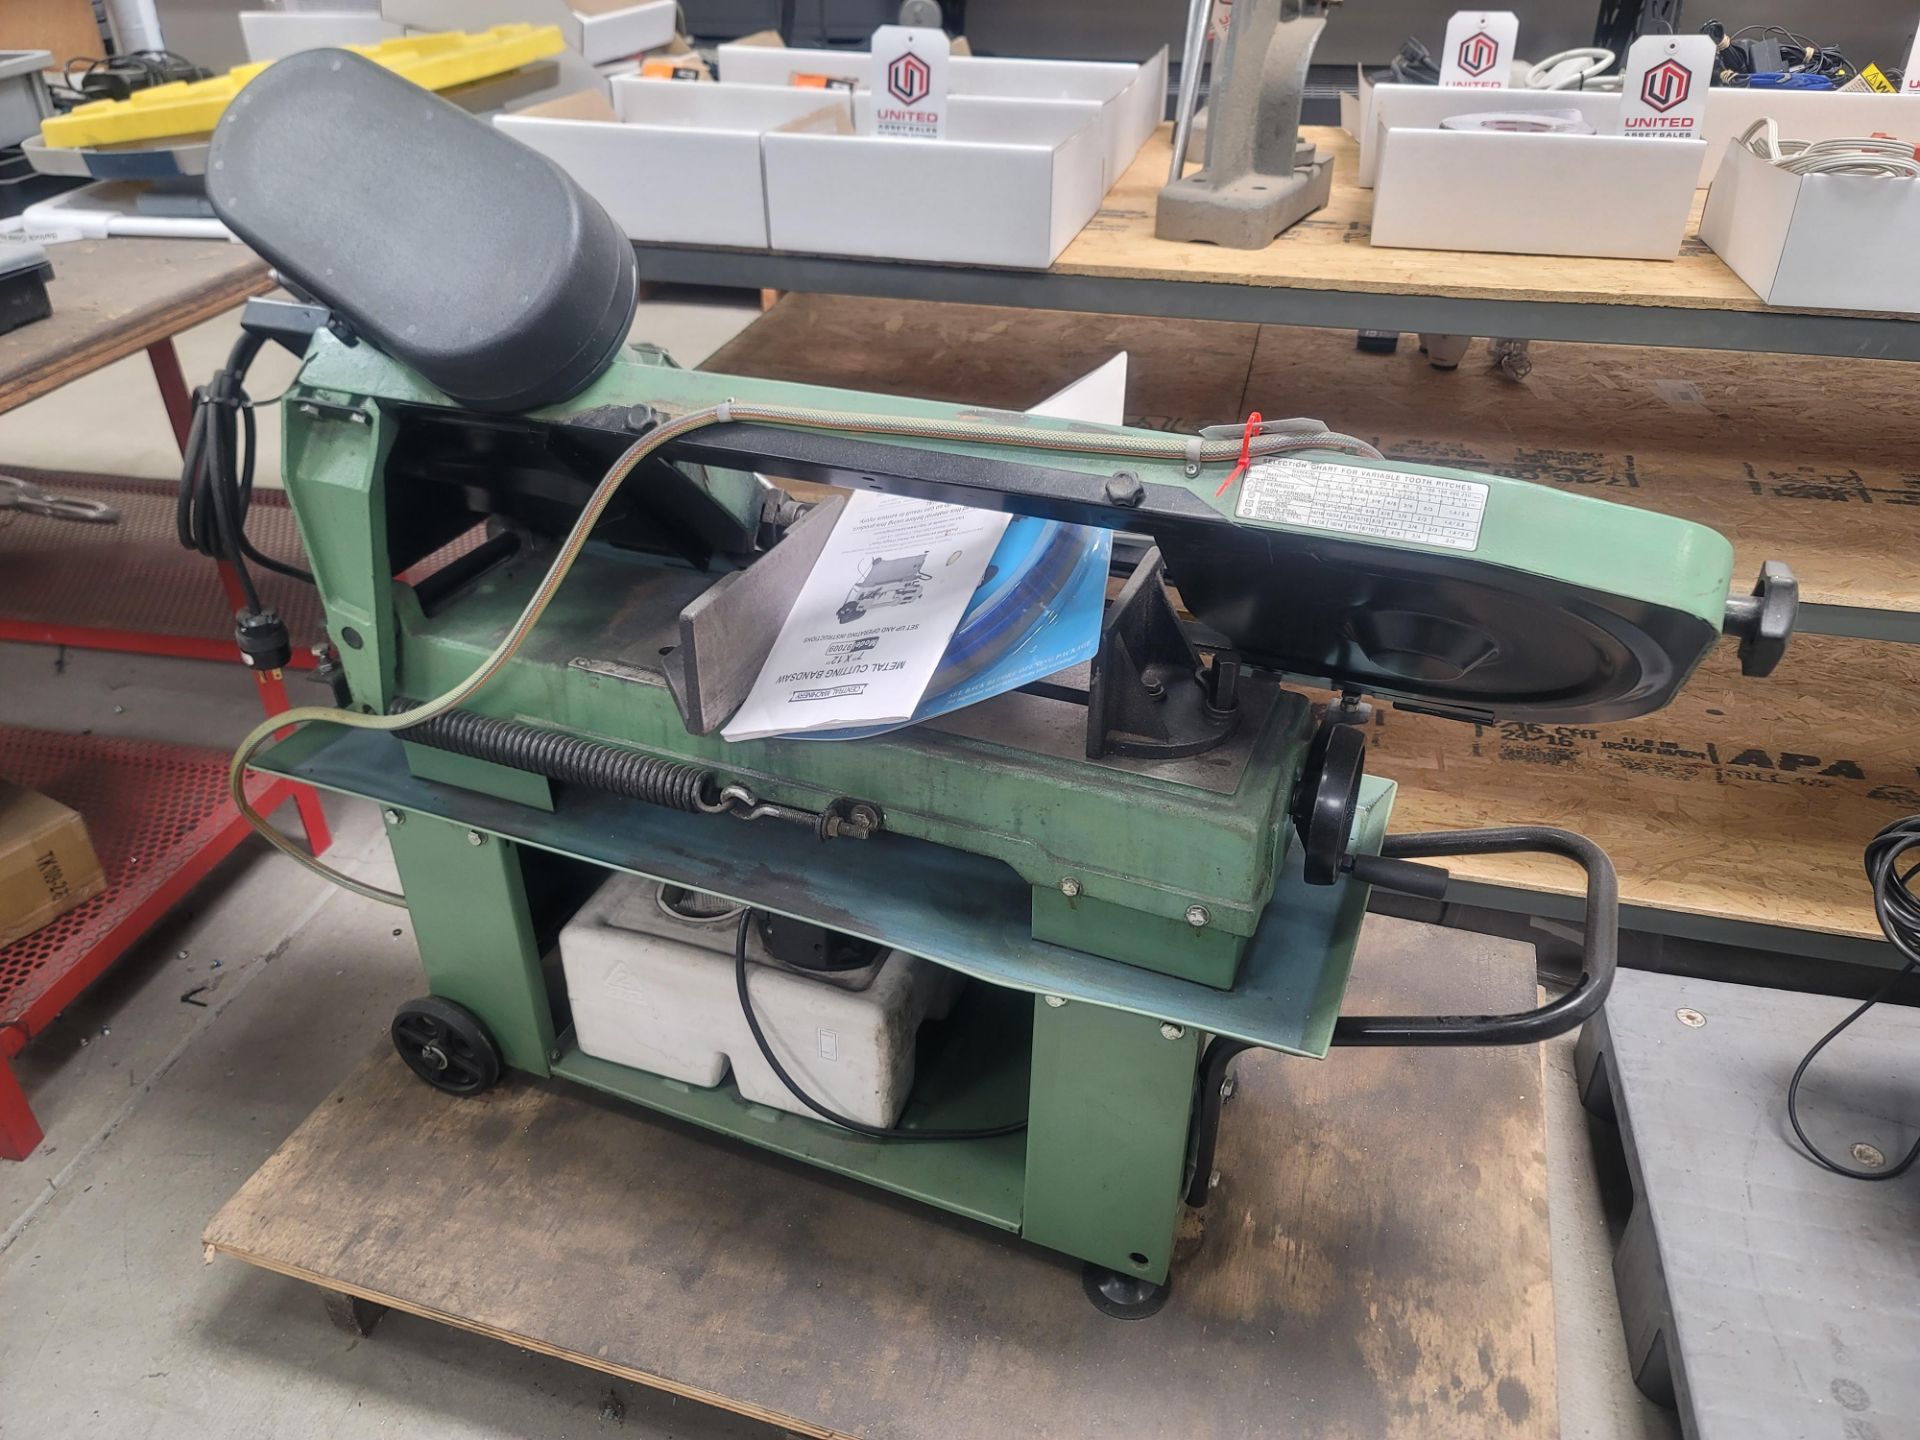 CENTRAL MACHINERY HORIZONTAL BAND SAW, MODEL 97009, 7" X 12", 1 HP, 110V/220V, 16 AMP, W/ EXTRA - Image 2 of 4